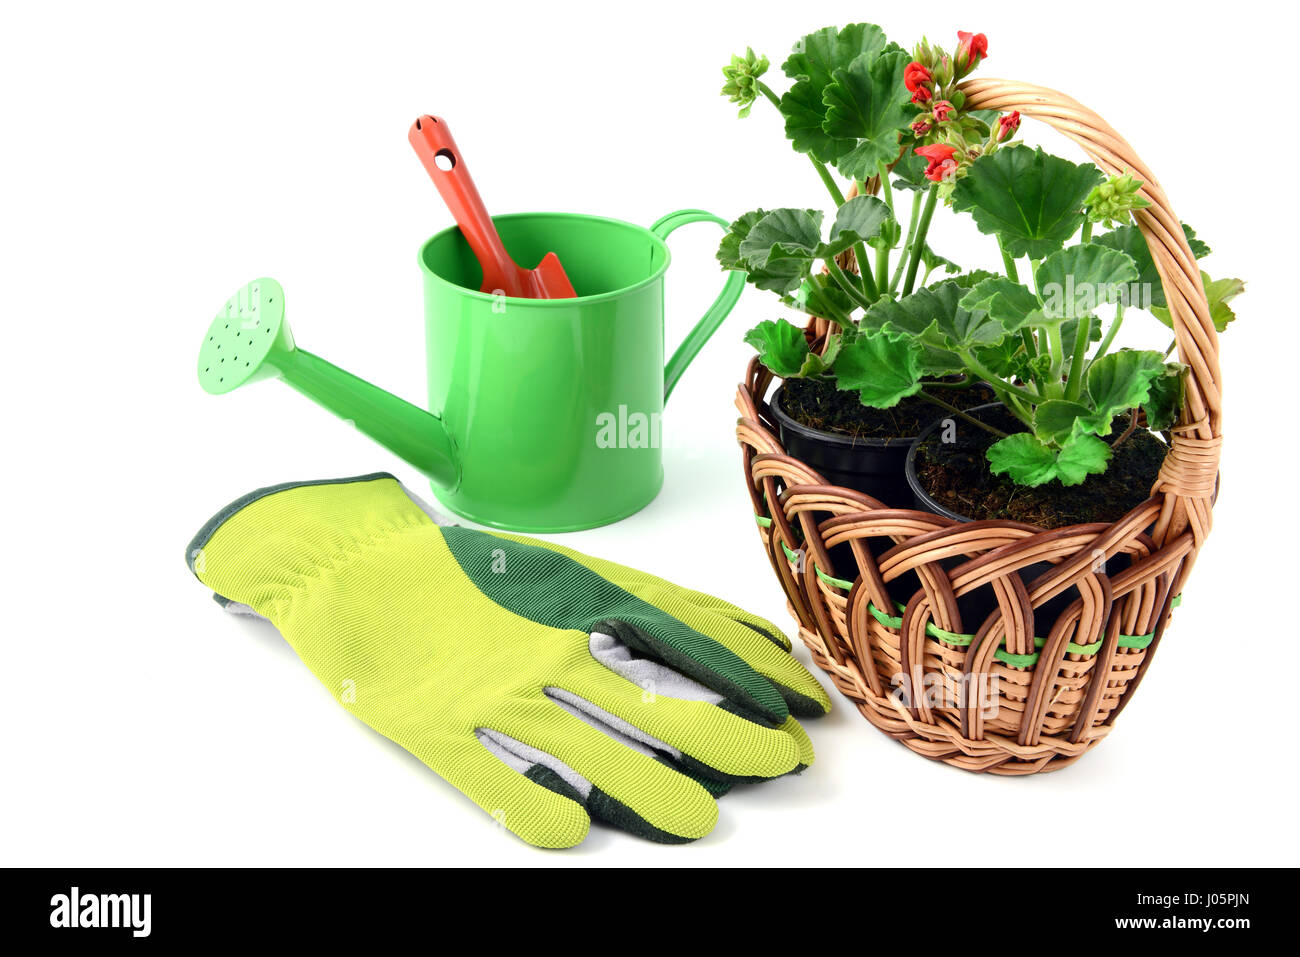 Geranium flowerpot in a basket with gardening tools like gloves, shovel, water can. isolated  background Stock Photo